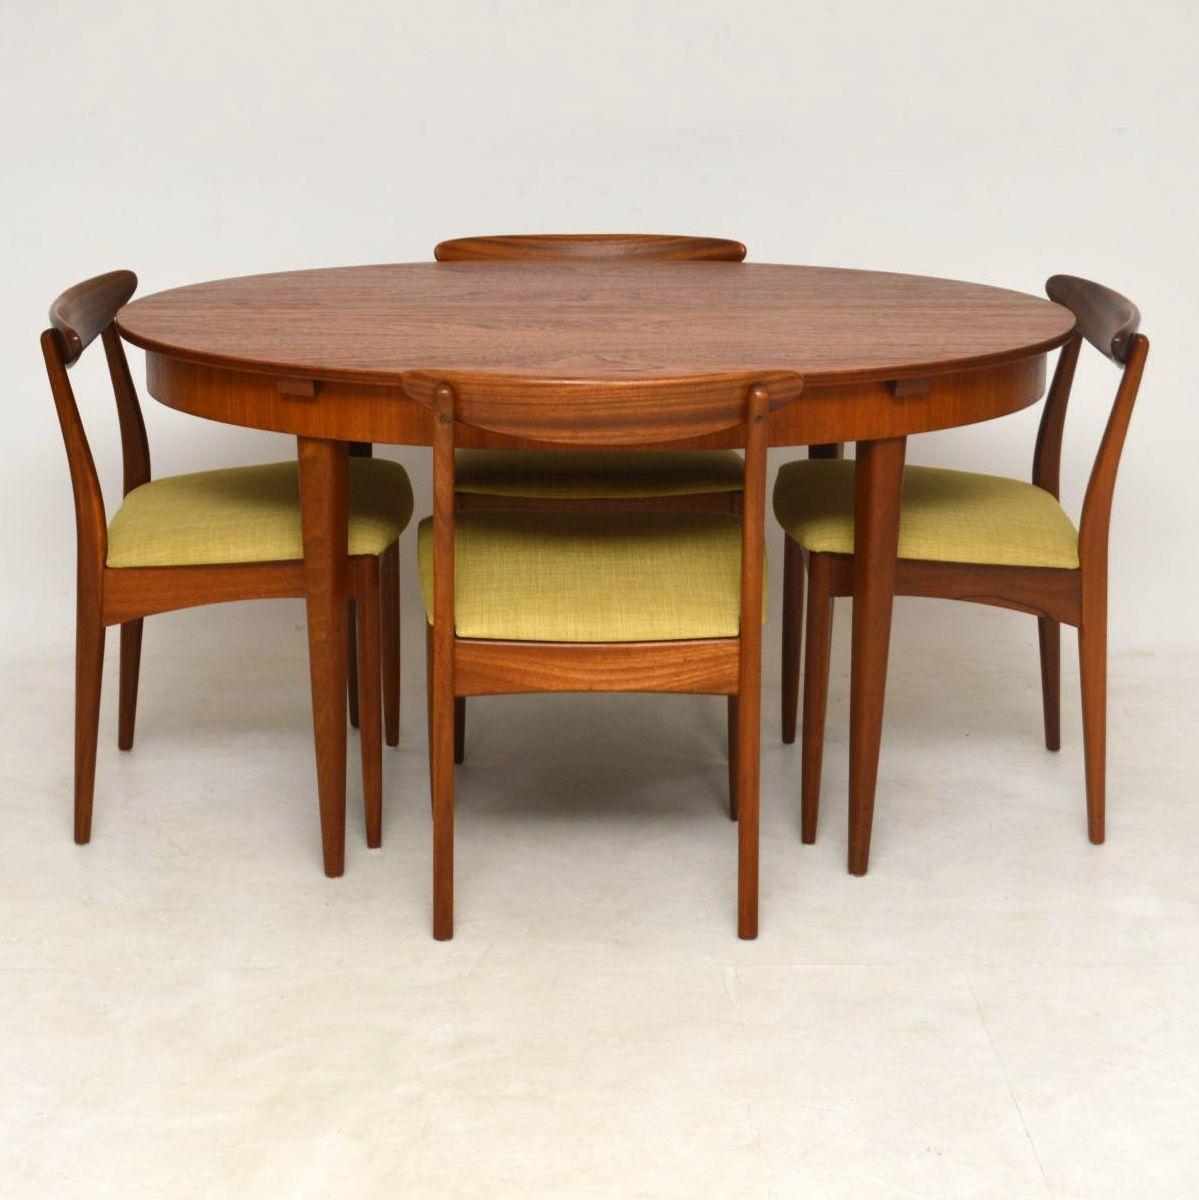 A beautifully made and very stylish vintage dining table and six dining chairs in teak. These were made in England by Greaves and Thomas, they date from the 1960’s.
The oval dining table seats four when closed, when opened it could comfortably seat